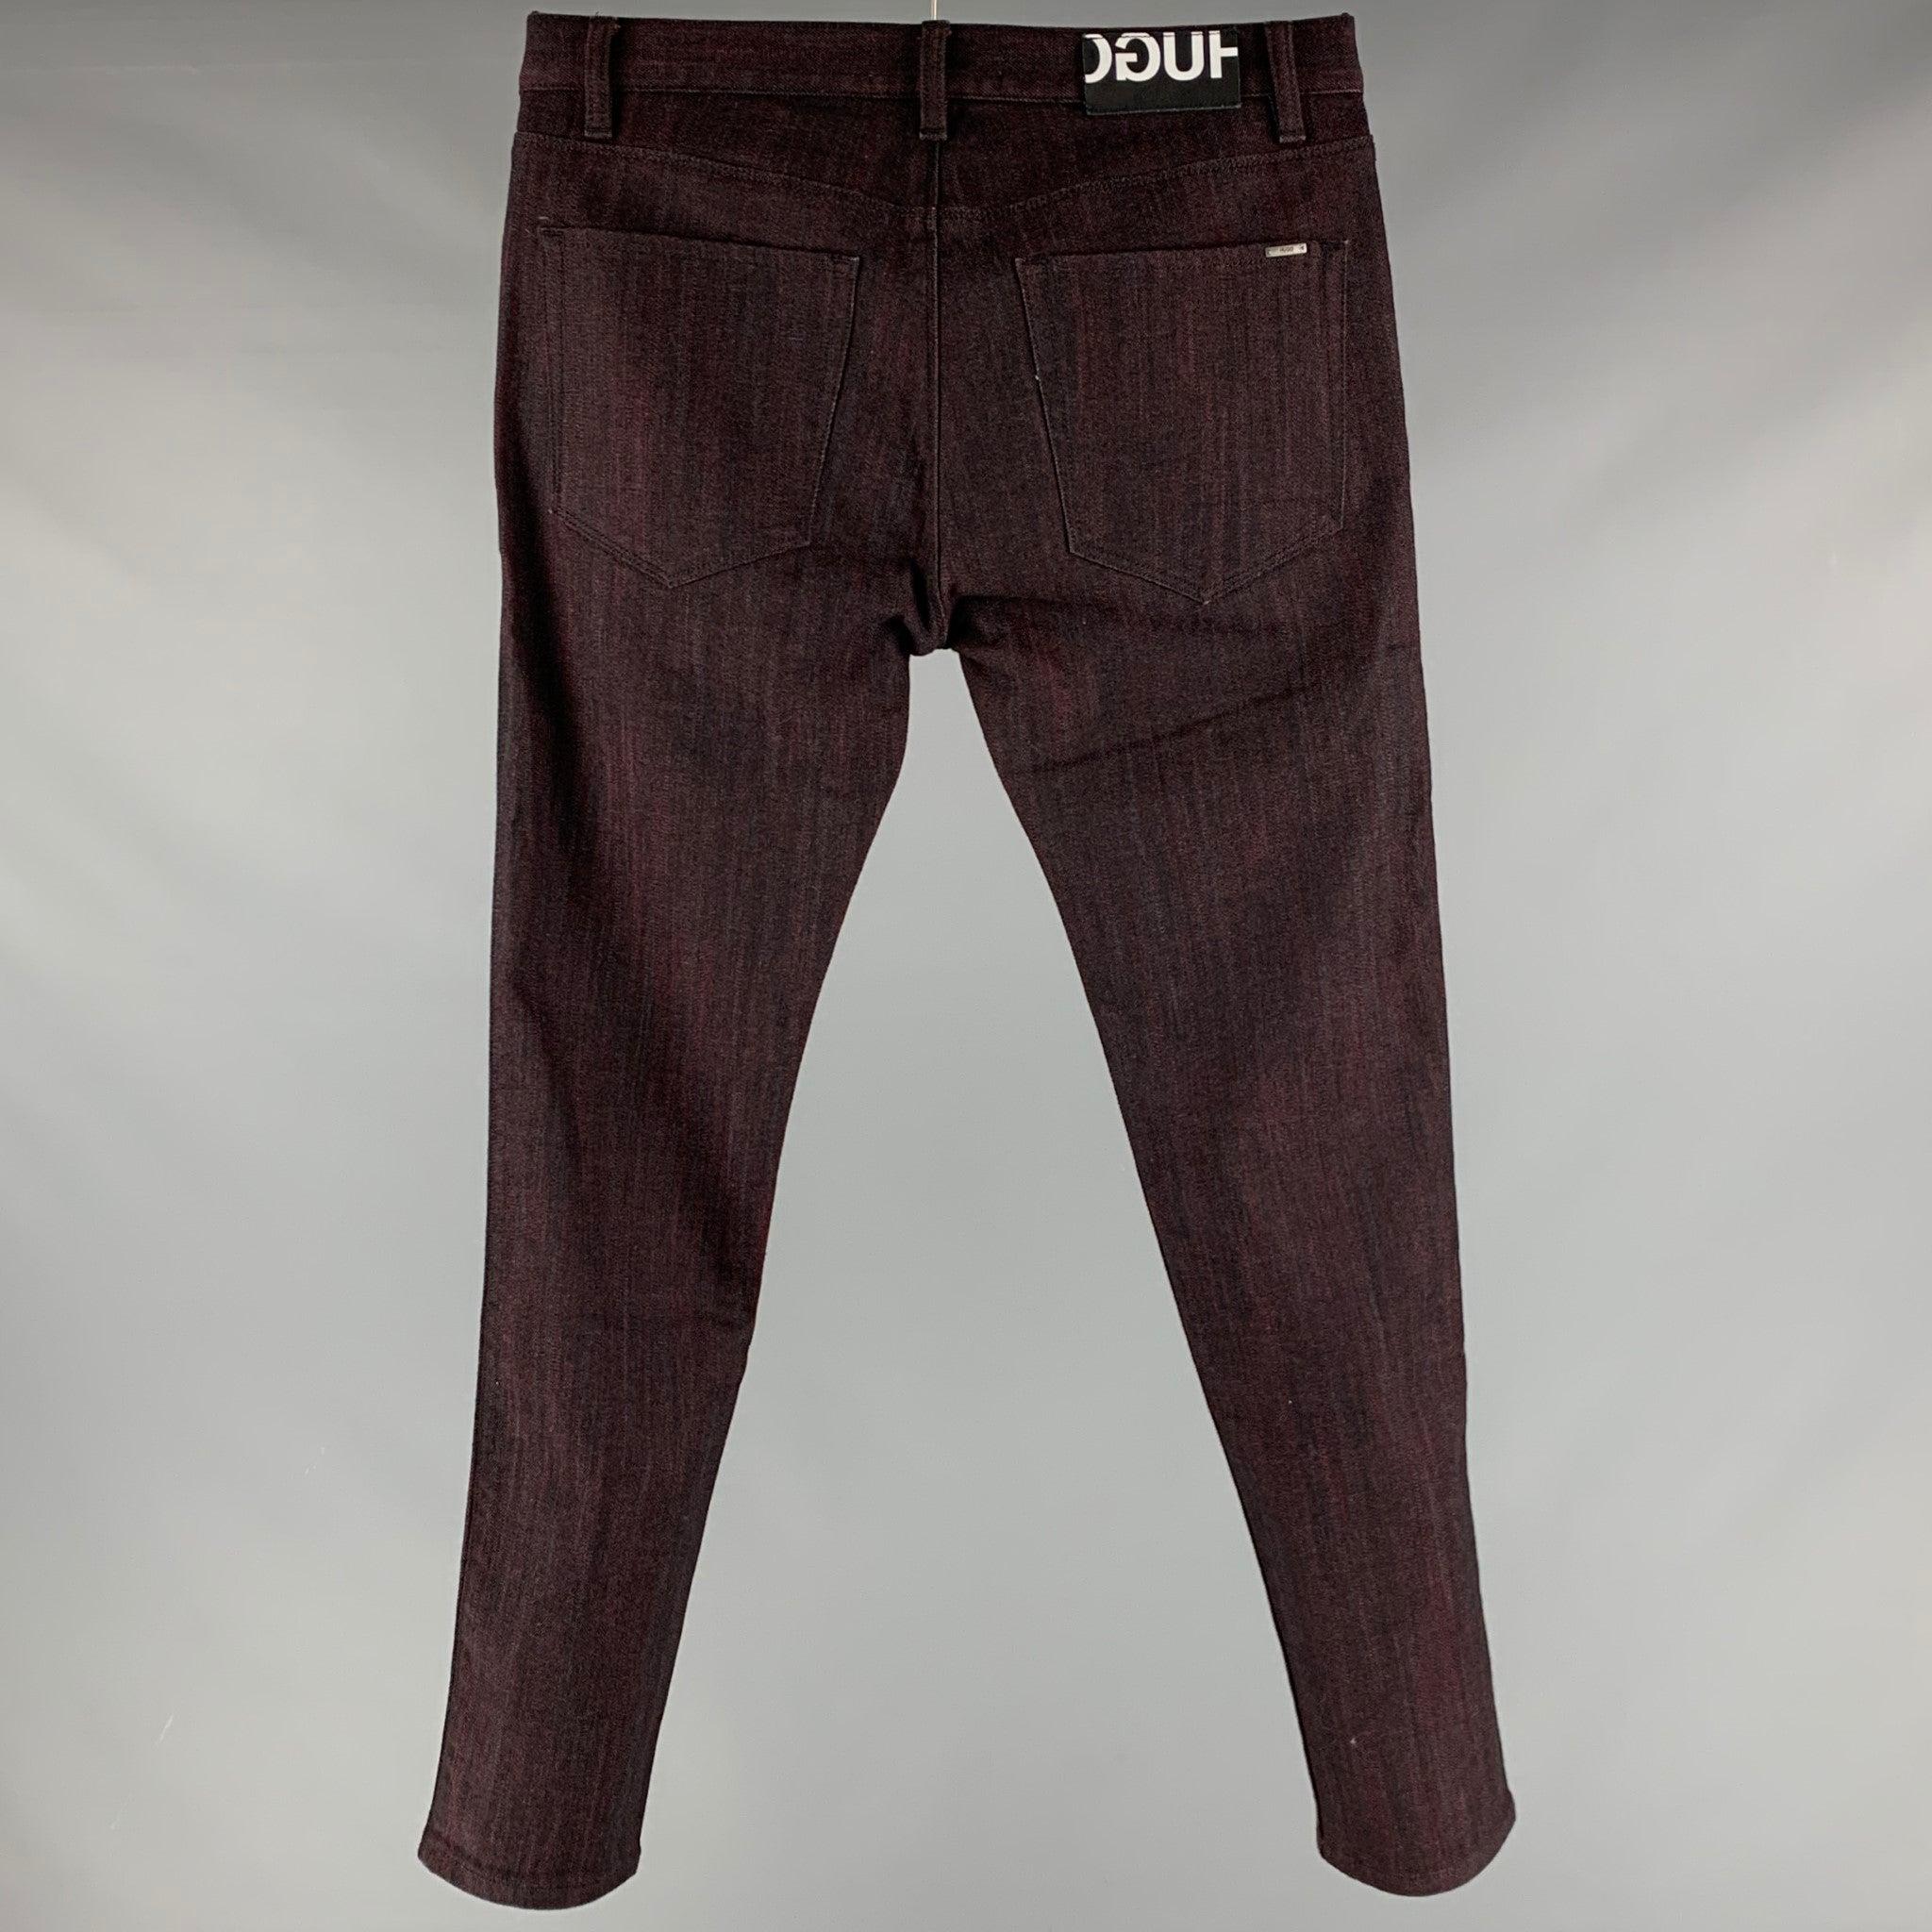 HUGO by HUGO BOSS jeans
in a black and burgundy cotton blend fabric featuring five pockets style, and zip fly closure.Excellent Pre-Owned Condition. 

Marked:   32/32 

Measurements: 
  Waist: 32 inches Rise: 8.5 inches Inseam: 32 inches 
  
  
